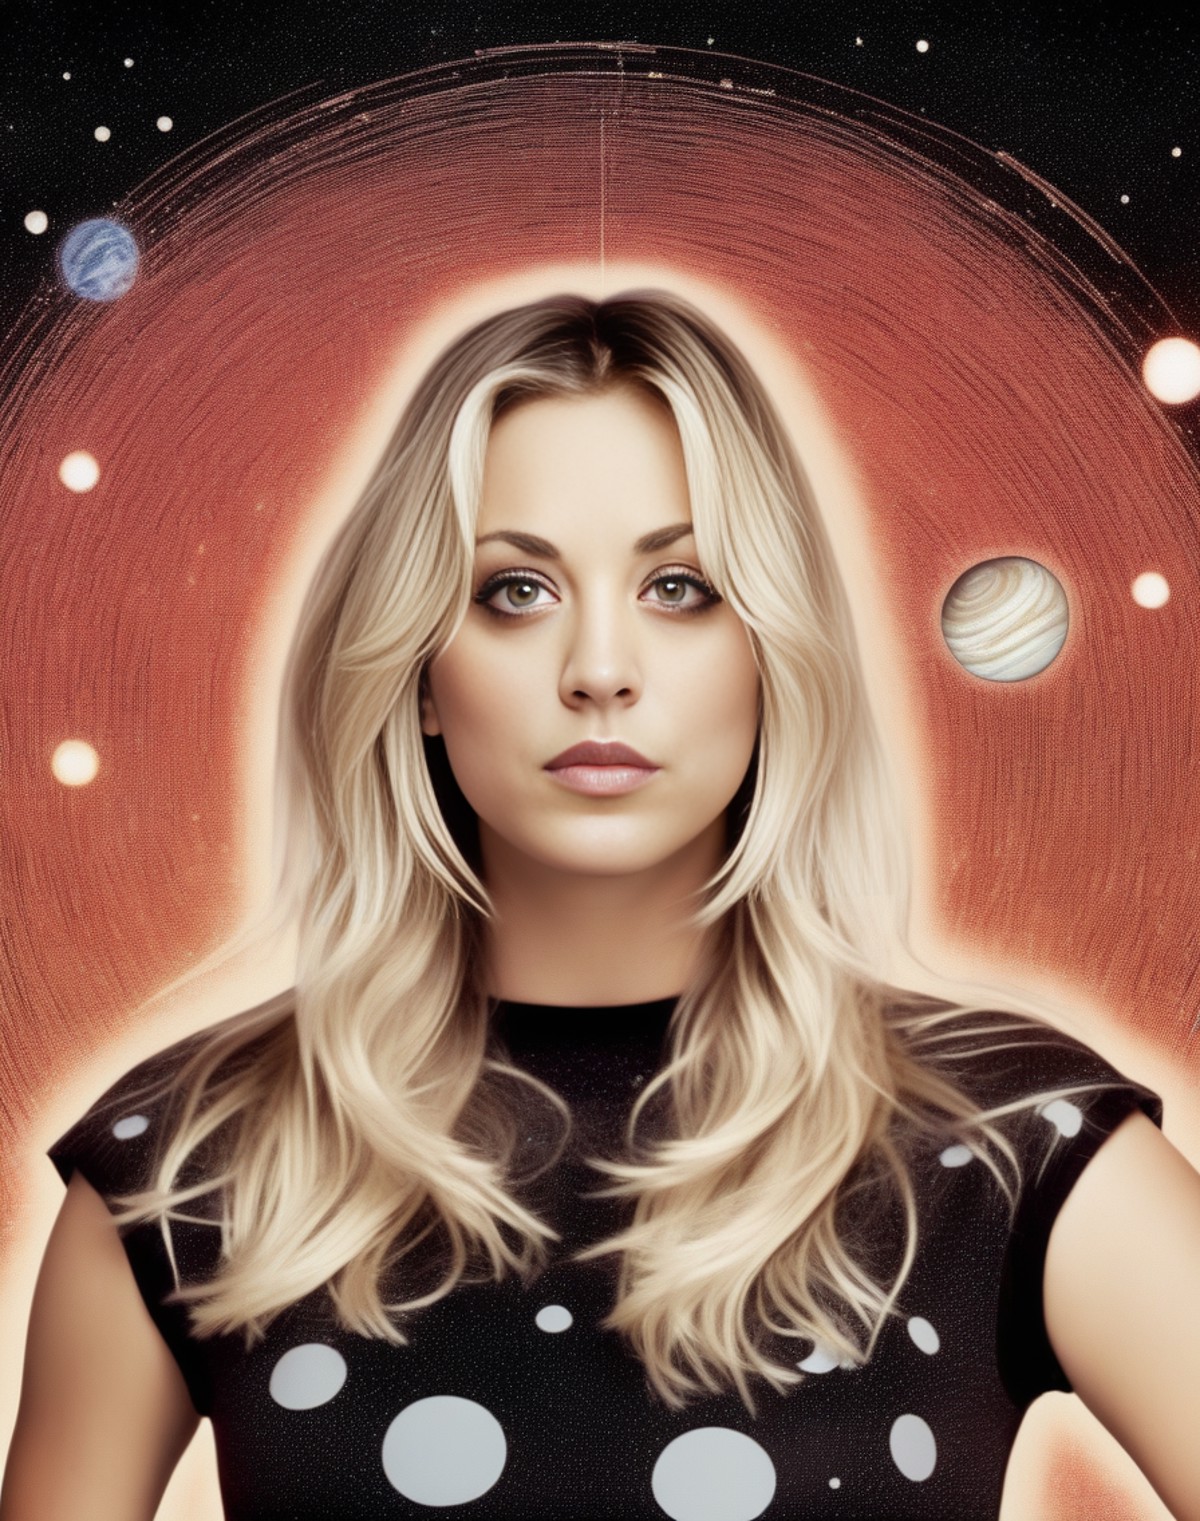 KaleyCuoco, art by Brian Bolland, photograph, Stupid curvy Girl surrounded by Interplanetary magnetic field, Bokeh, Screen...